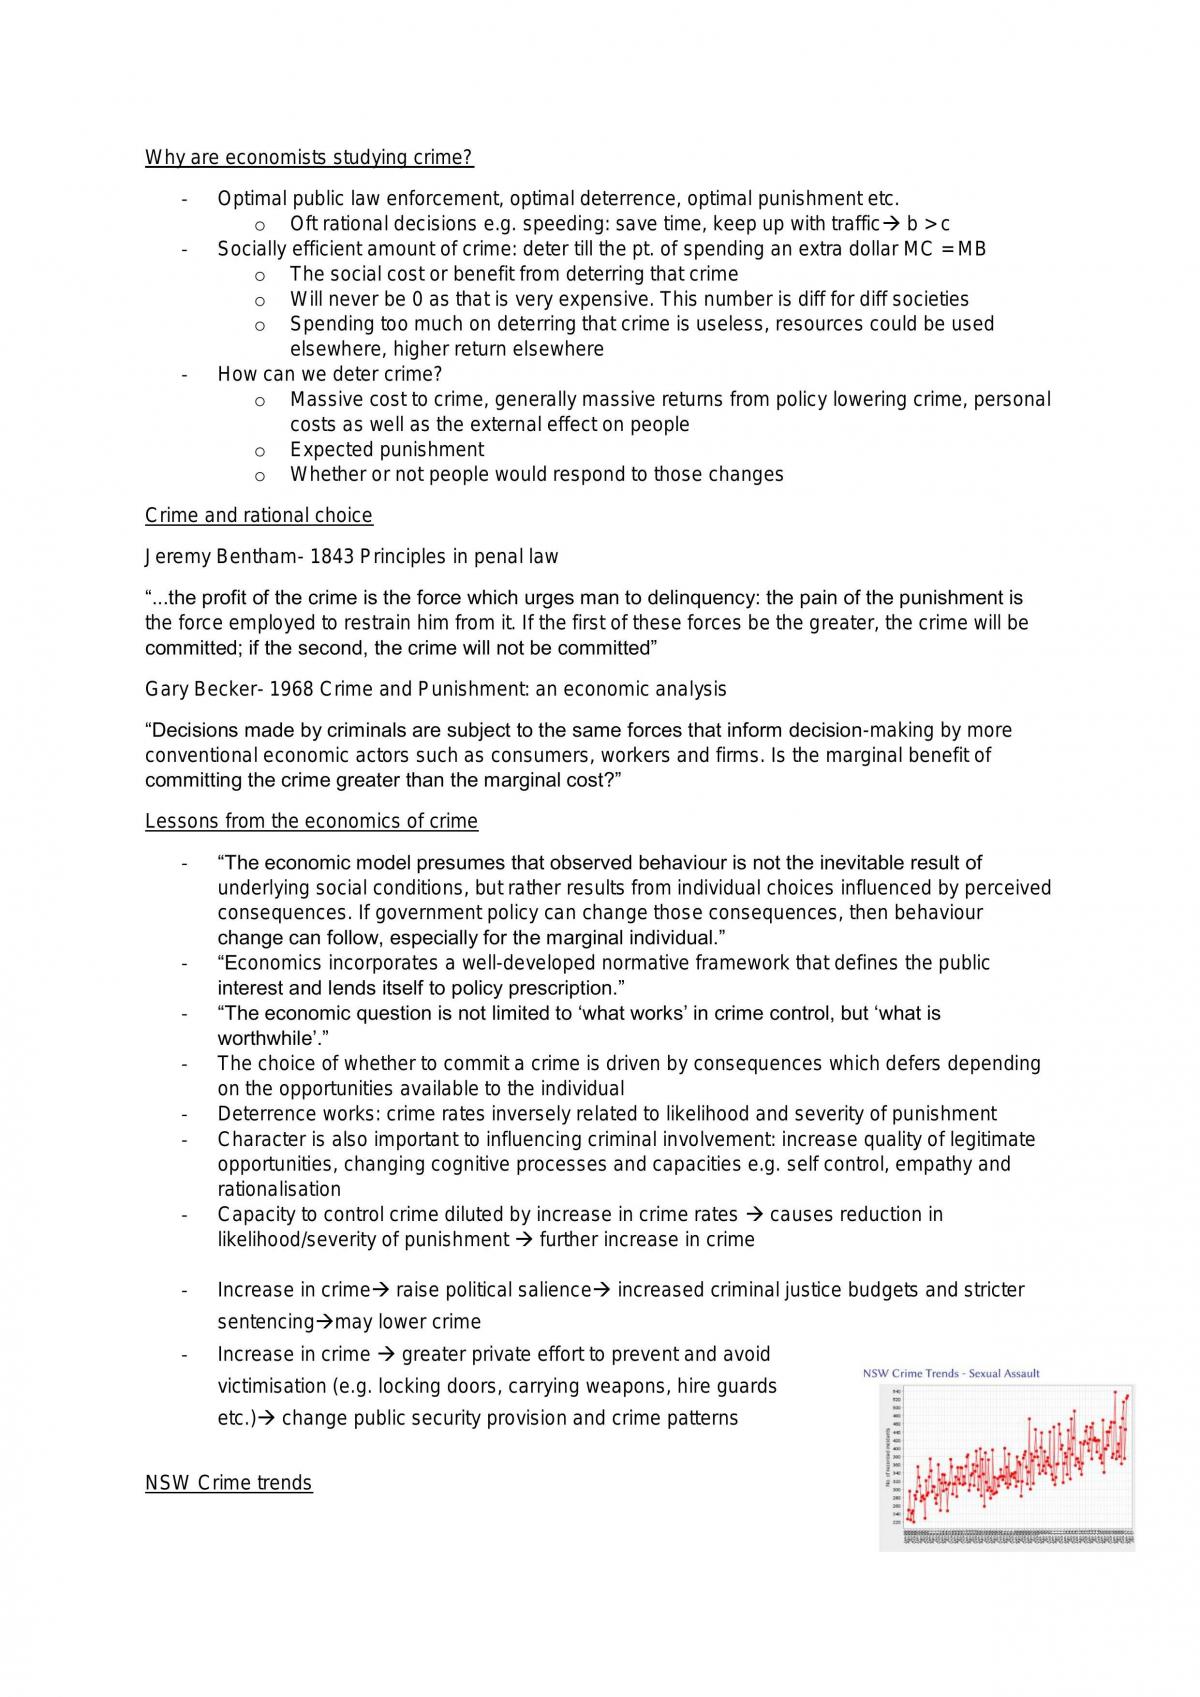 Complete Notes for Economics of Crime - Page 1